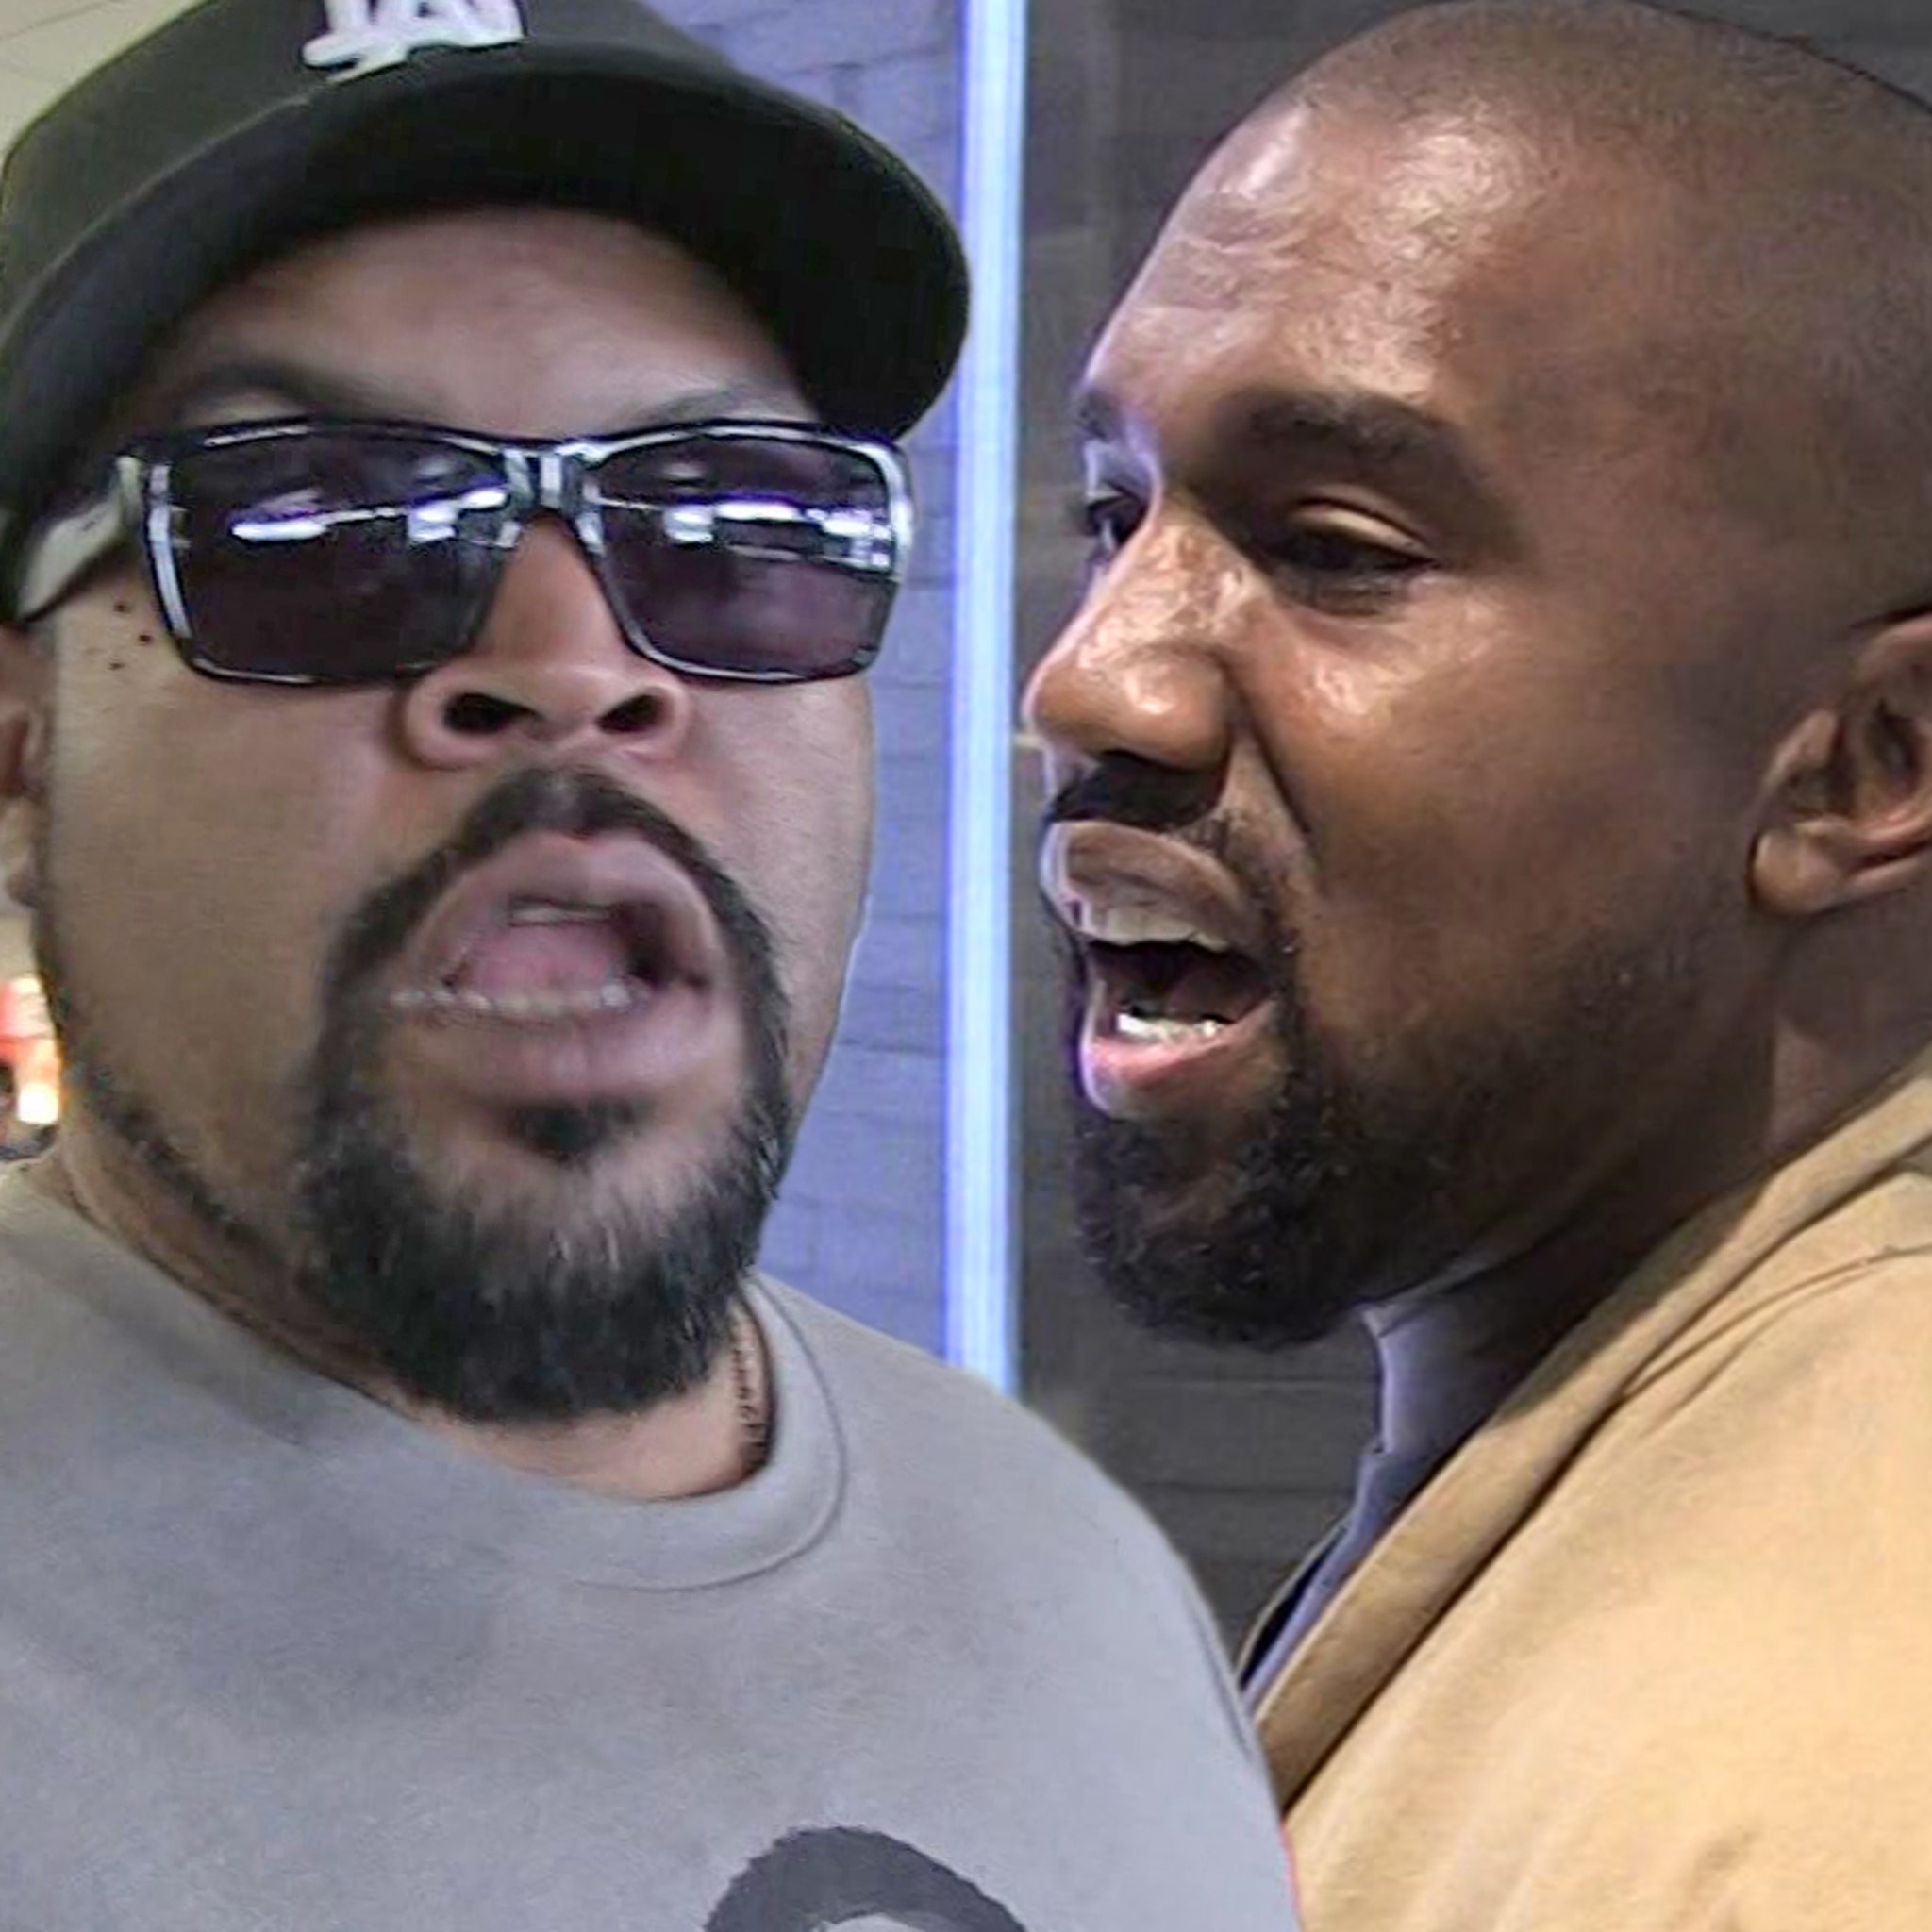 Pris tunnel sne hvid Ice Cube Denies Being Inspiration for Kanye's Antisemitic Comments